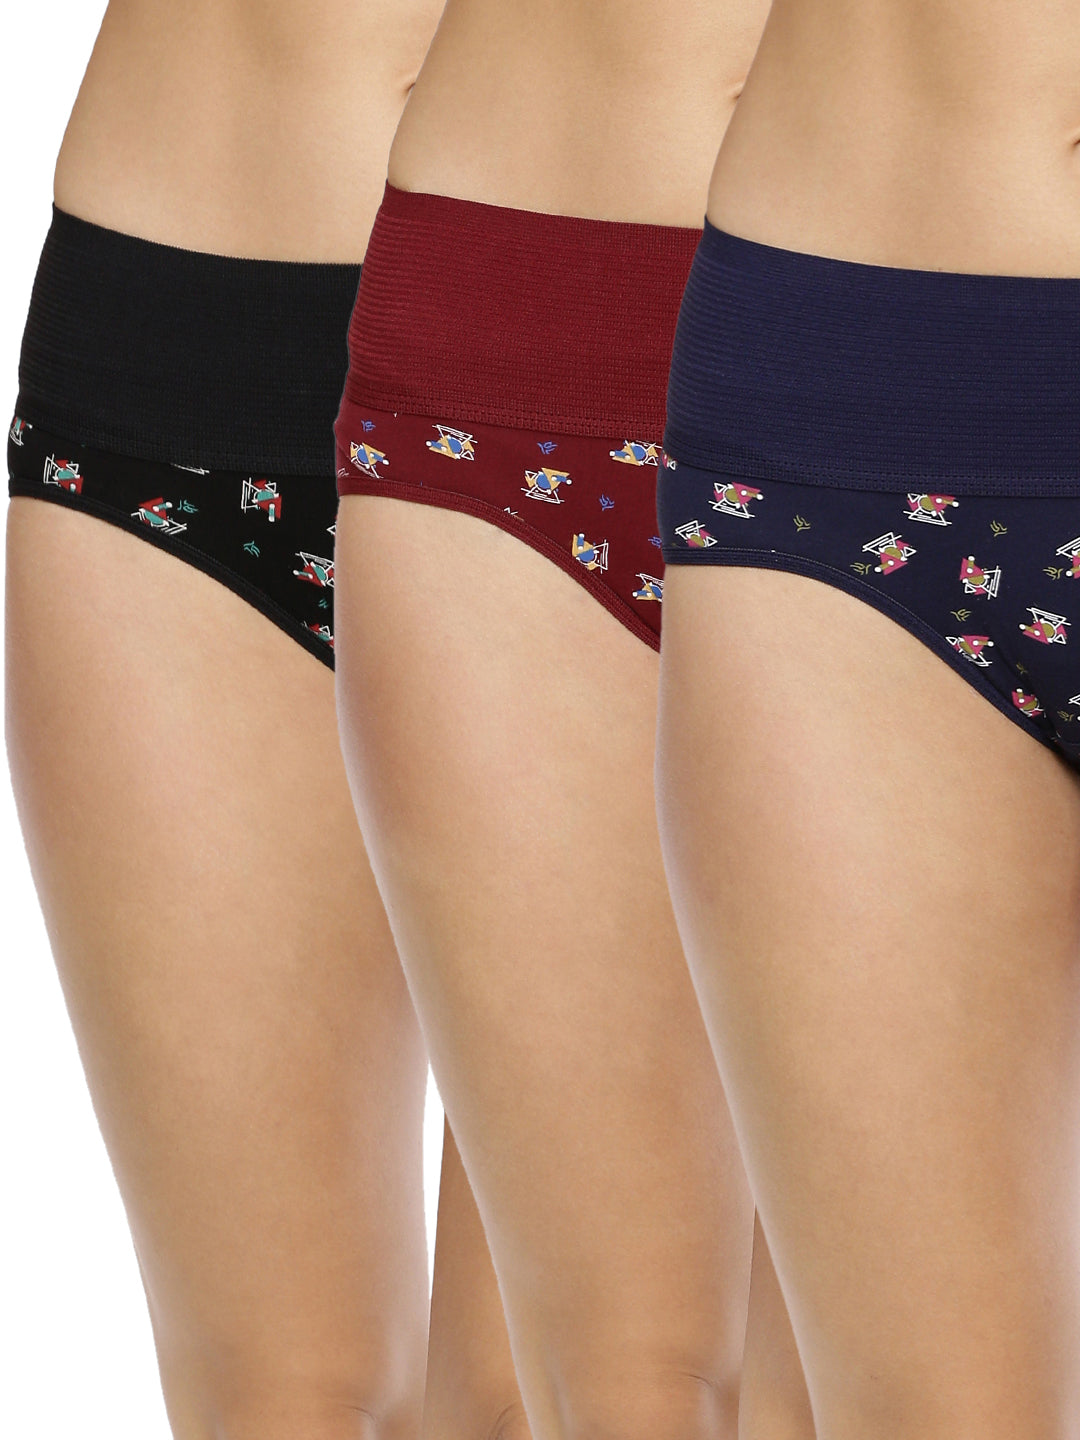 Red &Brown Cotton , Polyester Ladies Special Panties, Size: Small, Medium,  Large, XL, All Sizes at Rs 50/piece in Mumbai